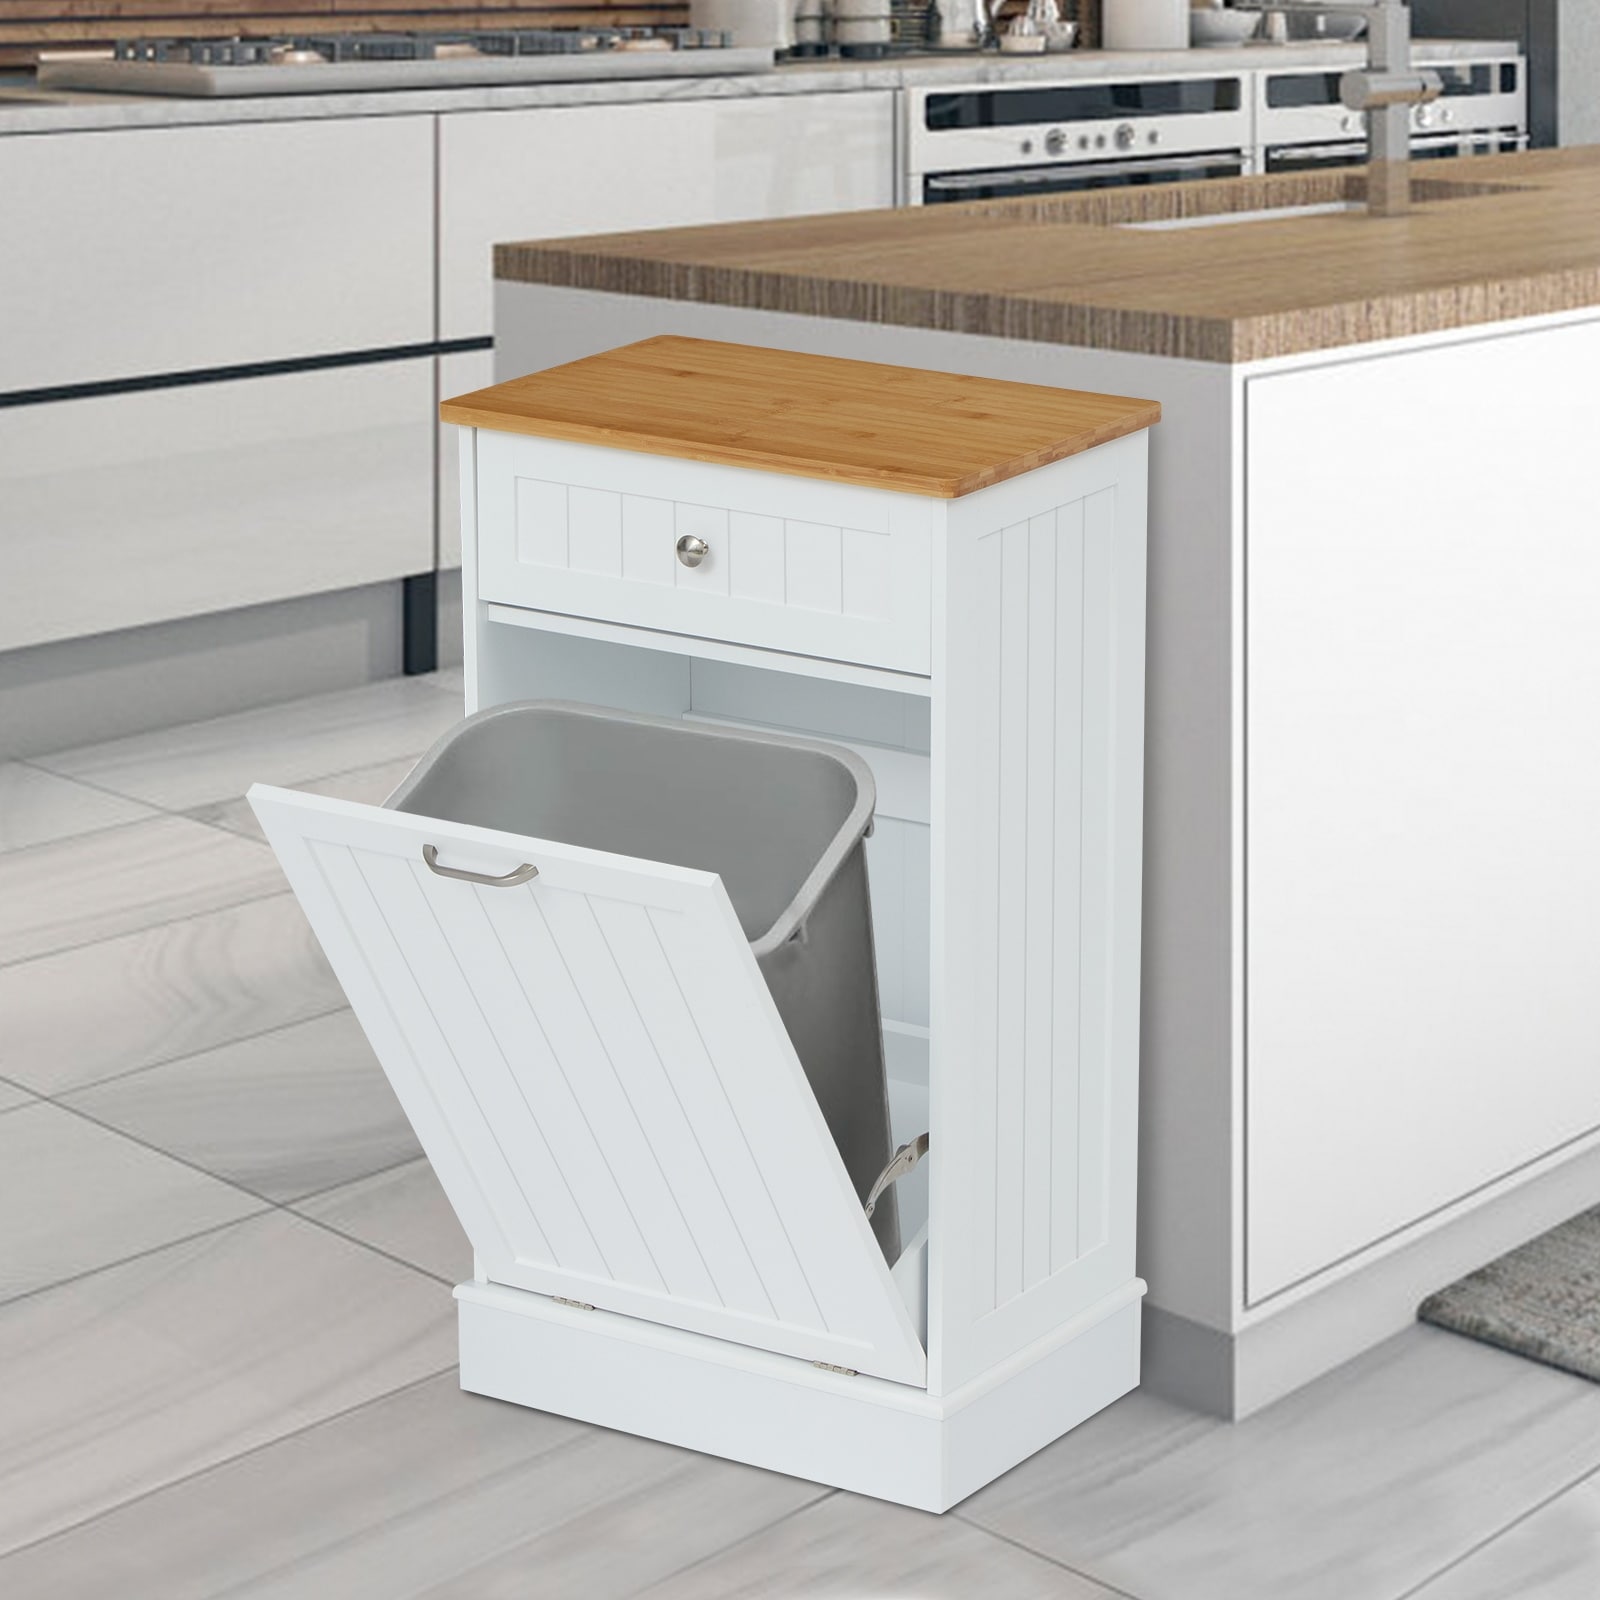 https://ak1.ostkcdn.com/images/products/is/images/direct/4ad596924d4268faf7e6eb9341a5b058b8802eaf/Kinbor-Tilt-Out-Trash-Cabinet-Wooden-Kitchen-Trash-Bin-Can%2CRecycling-Cabinet-w--Drawer-and-Removable-Bamboo-Cutting-Board%2C-White.jpg